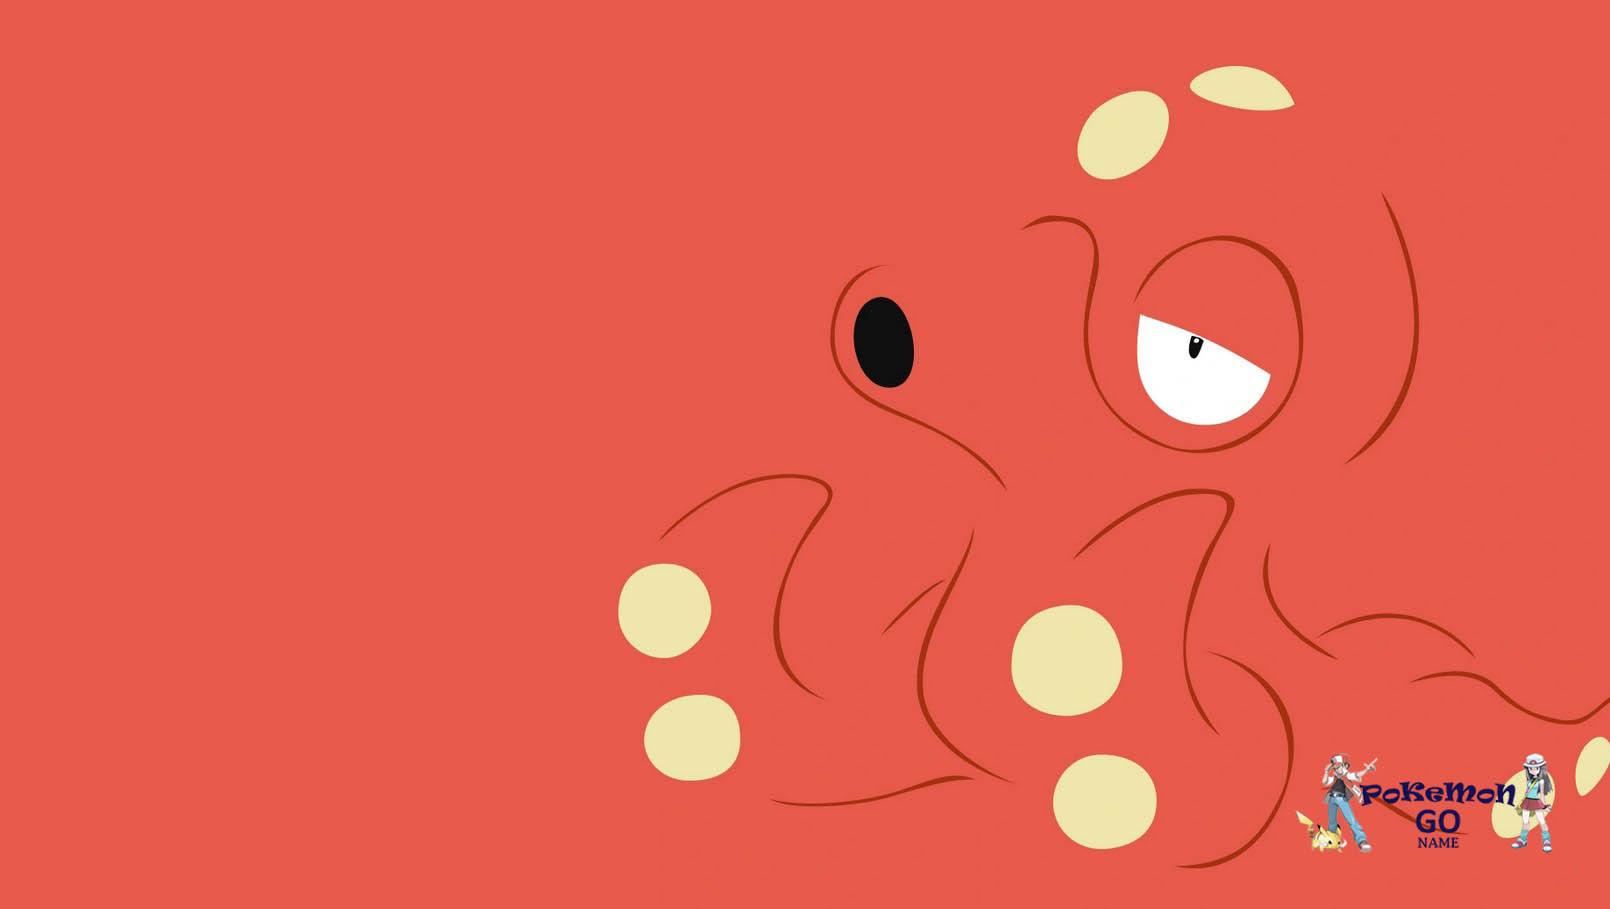 Pokemon GO Octillery Raid Boss Top Counters Solo Guide - who to beat Octillery